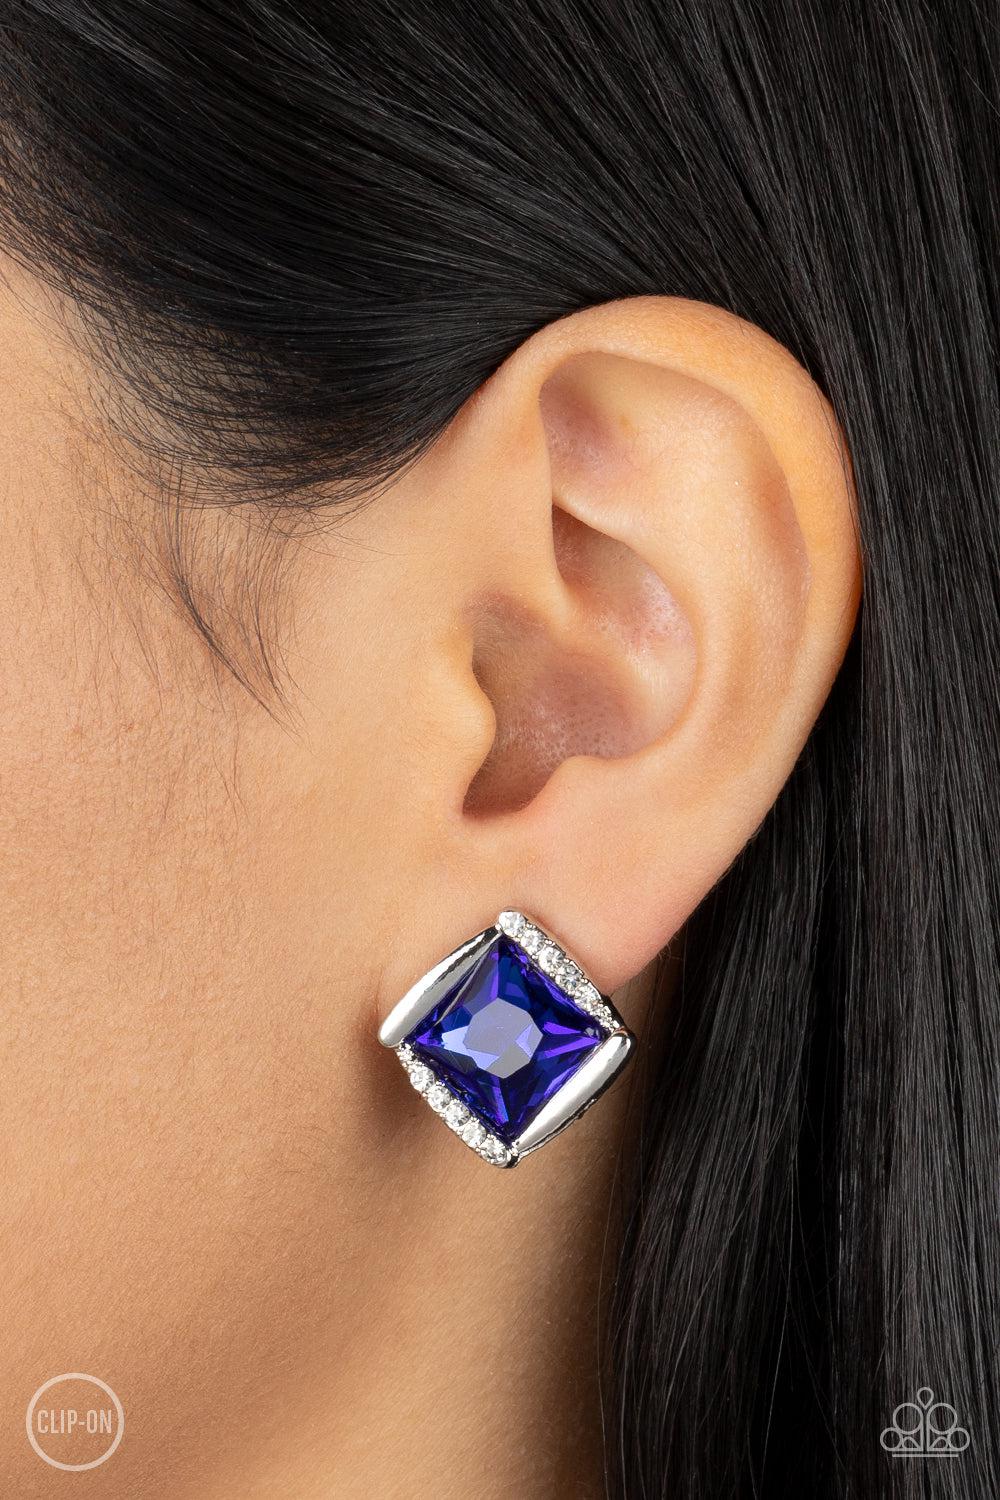 Sparkle Squared Blue & White Rhinestone Clip-on Earrings - Paparazzi Accessories- lightbox - CarasShop.com - $5 Jewelry by Cara Jewels